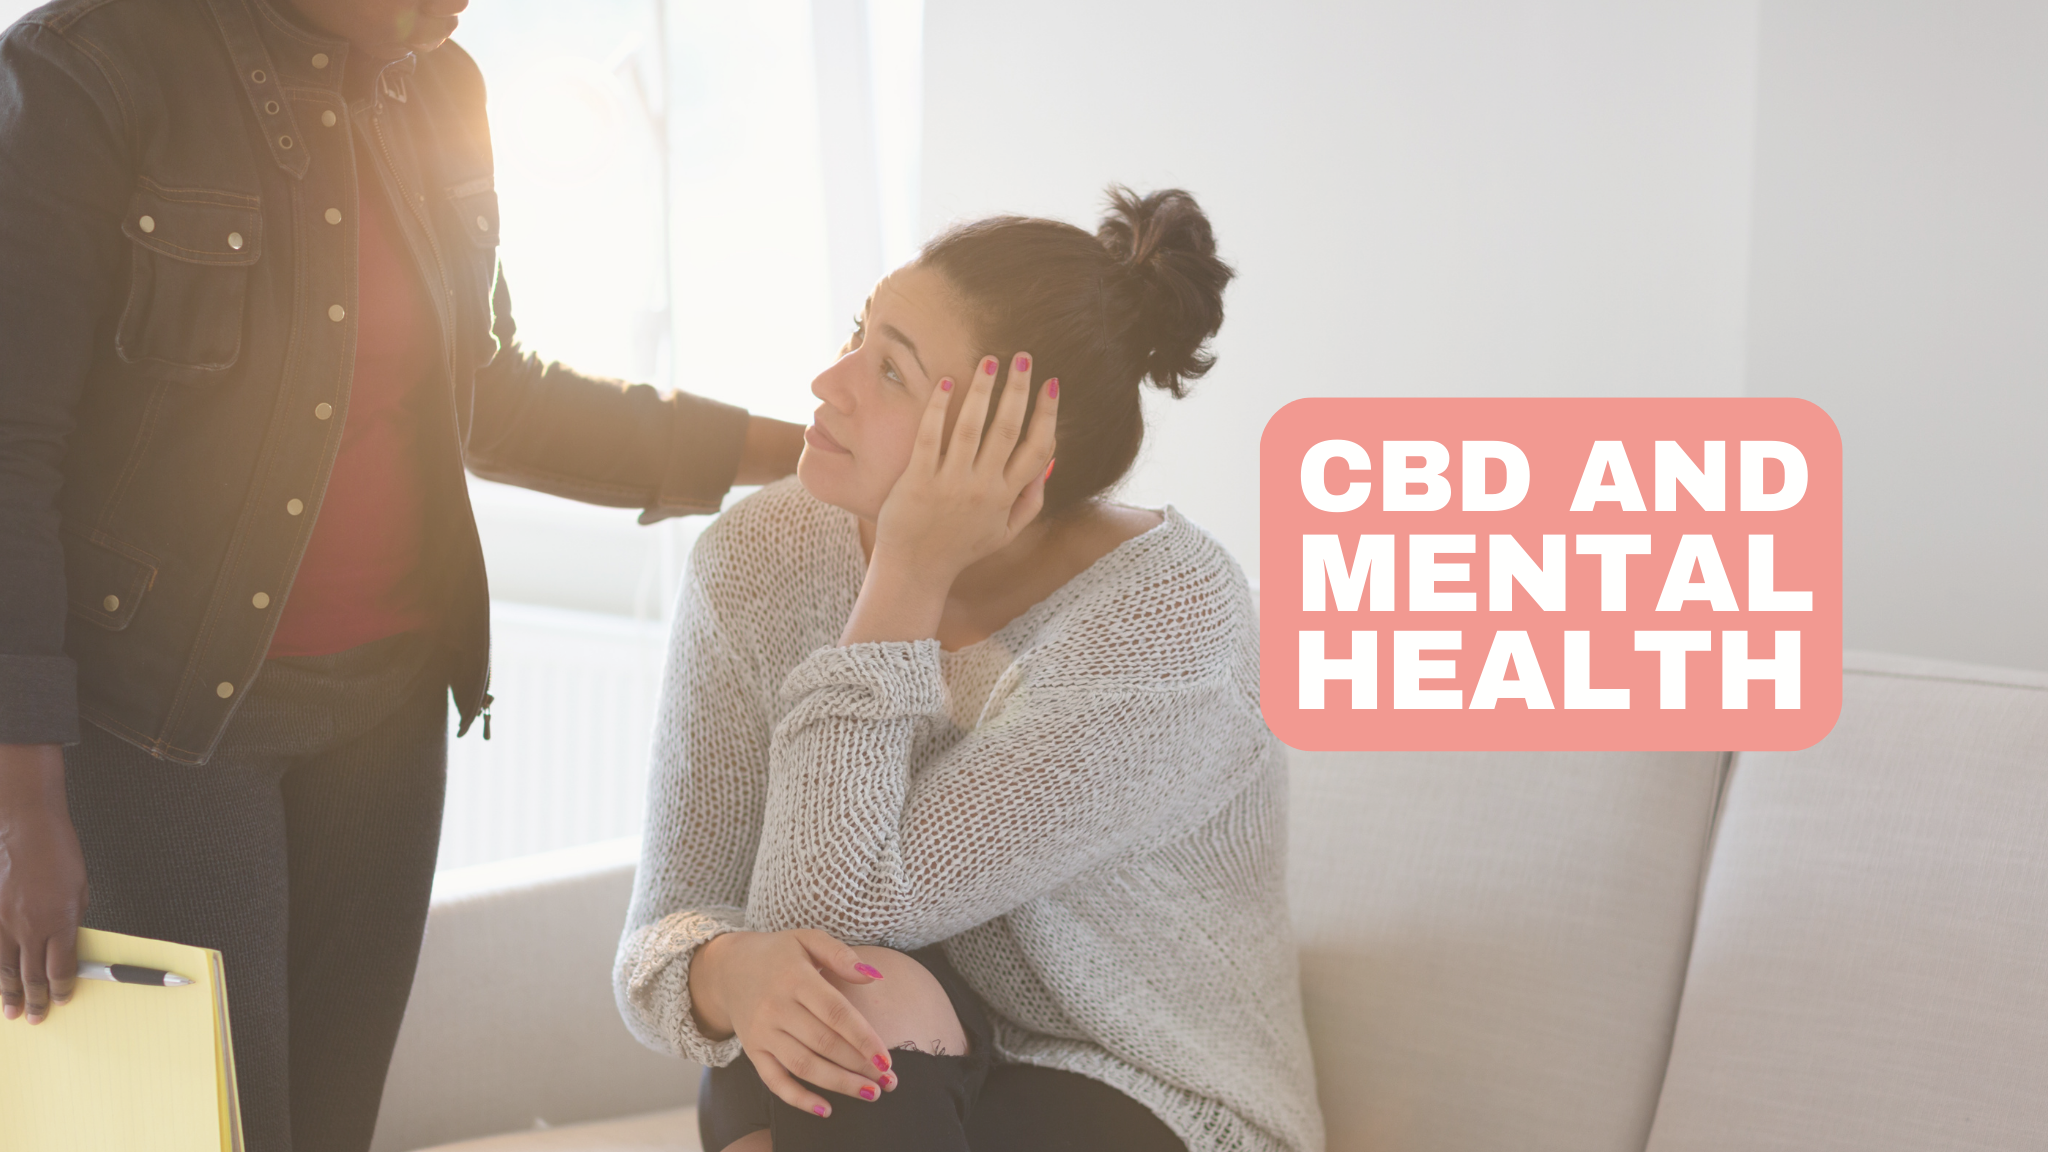 CBD and Mental Health: The Role of CBD in Treating Anxiety, Depression and Other Mental Disorders